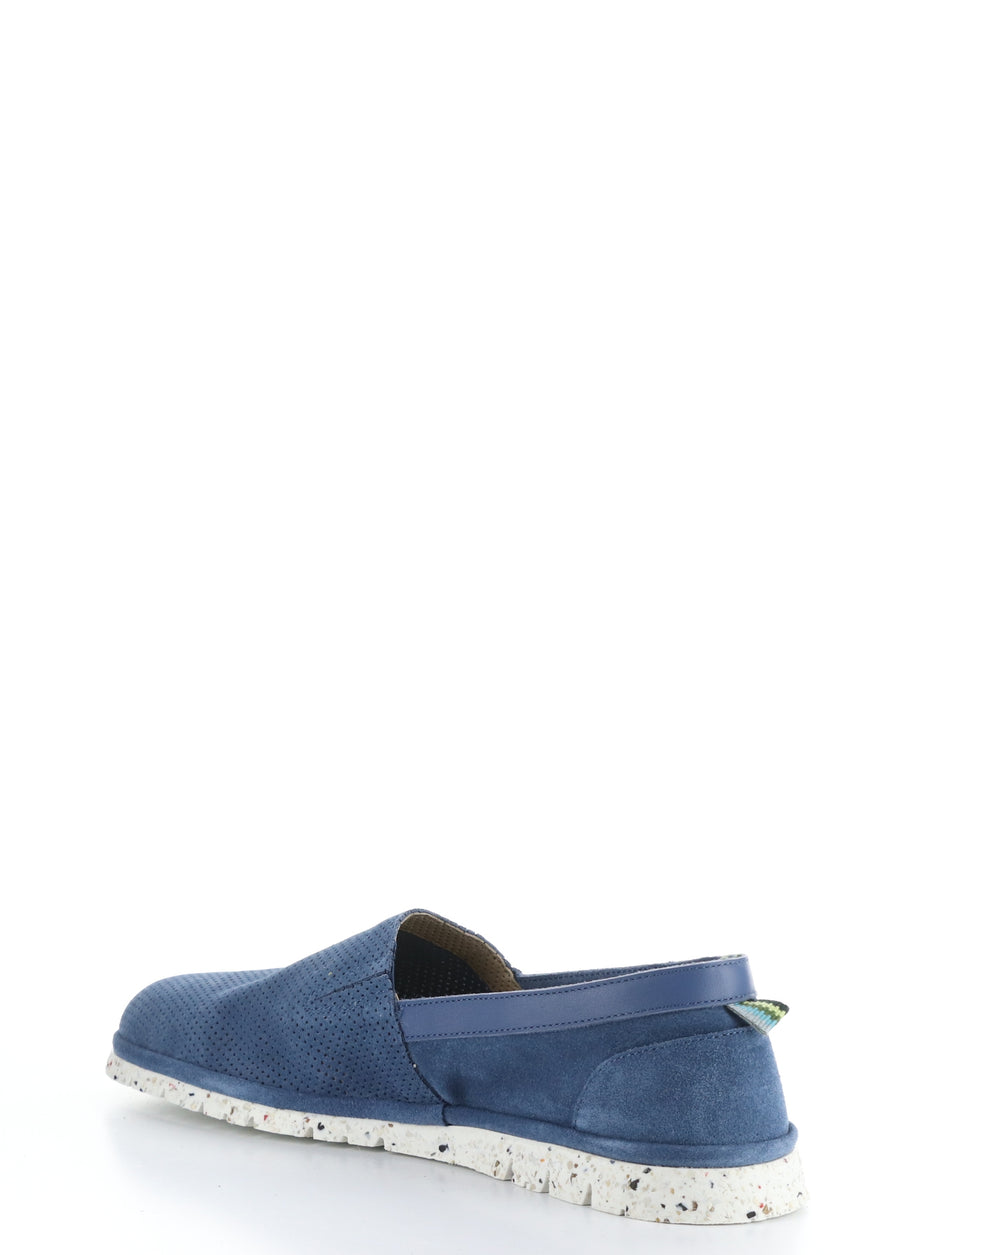 11162 JEANS Round Toe Shoes